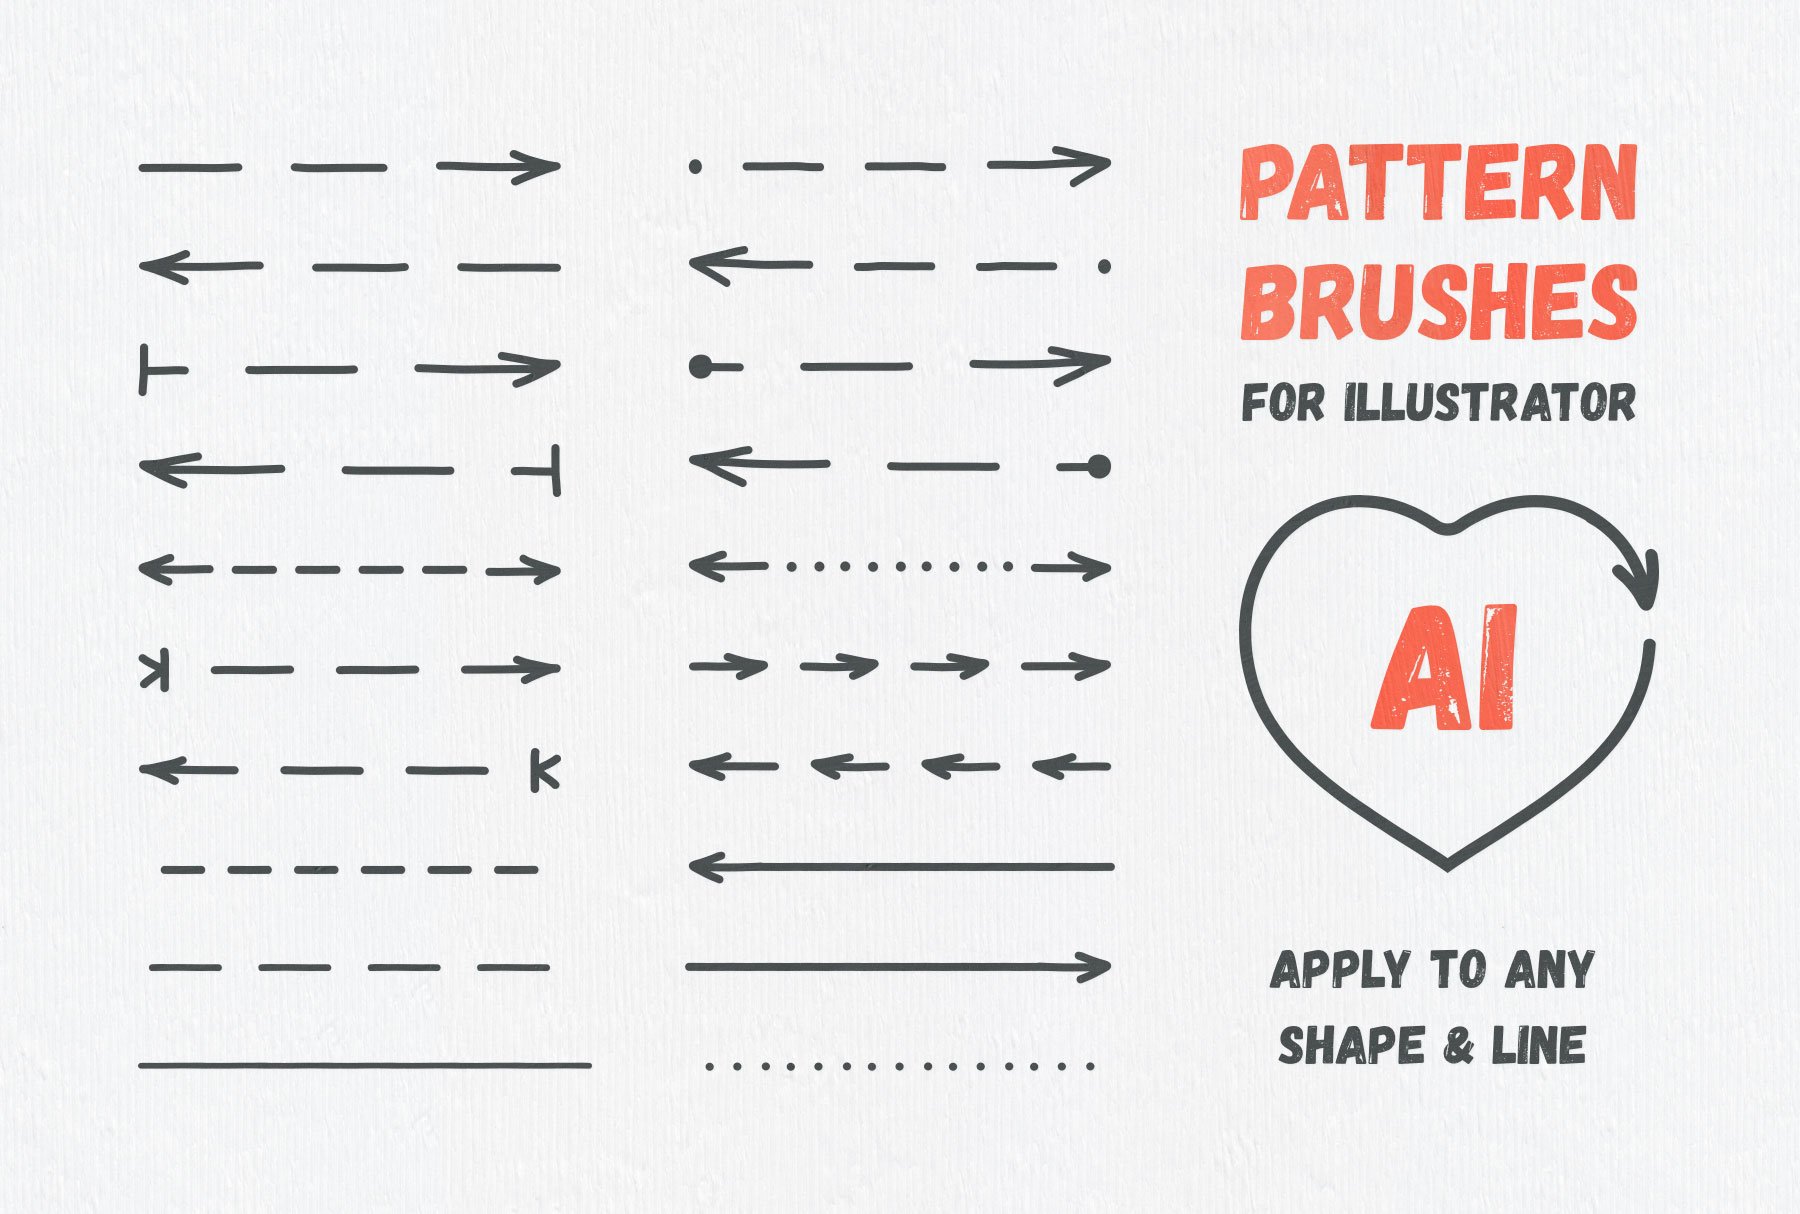 Arrow Head: Pattern Brushes & Vectorpreview image.